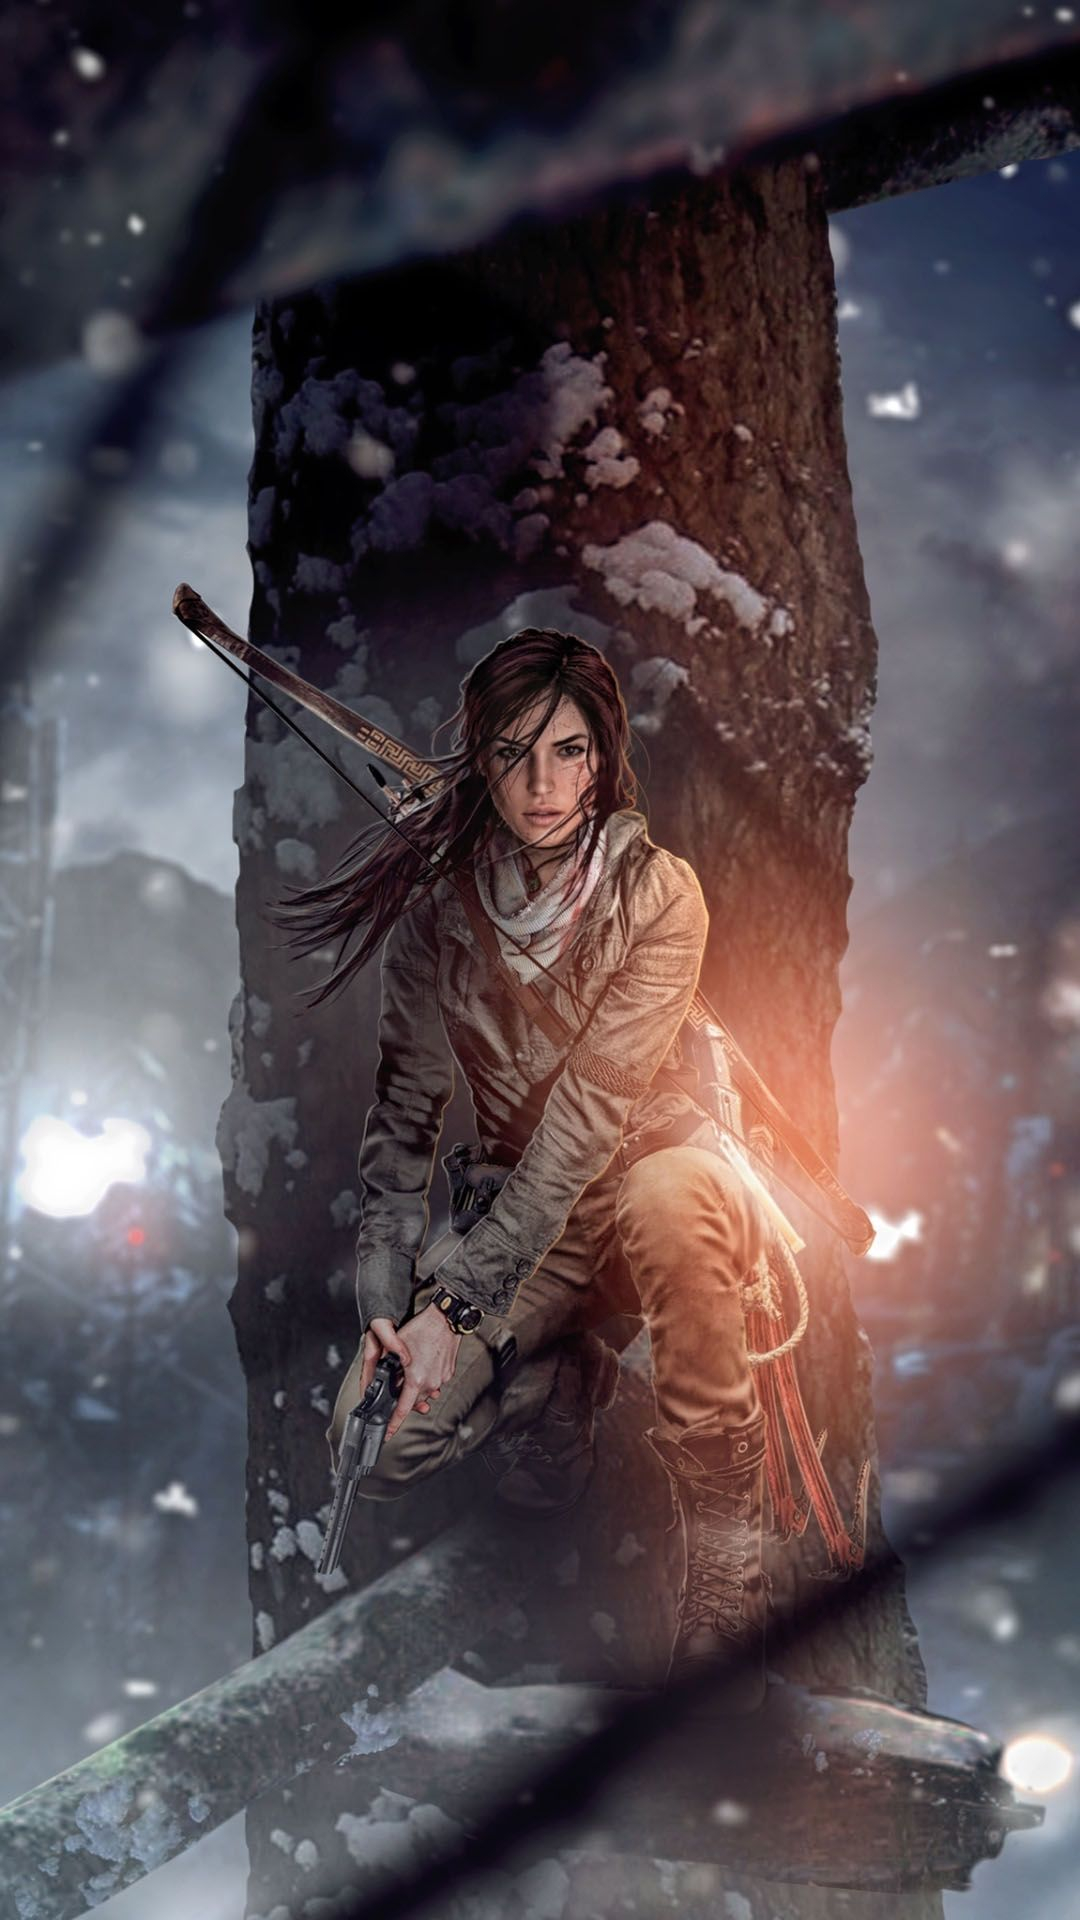 1080x1920 Rise Of The Tomb Raider Wallpaper Sweden, SAVE 37%